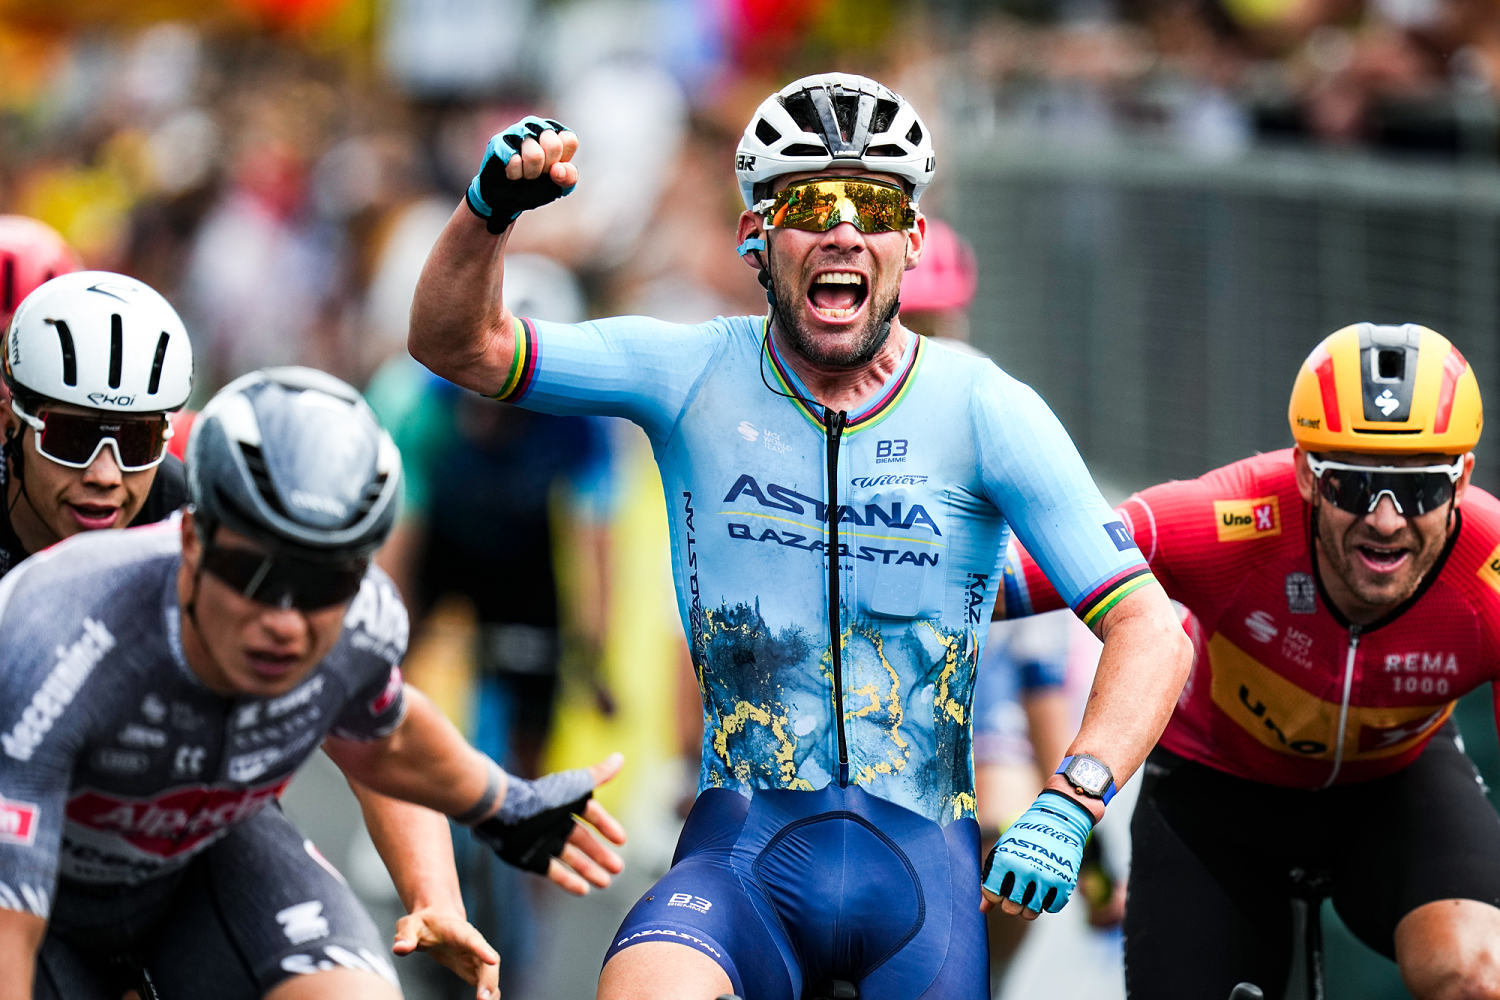 Mark Cavendish claims record-breaking 35th career Tour de France stage win